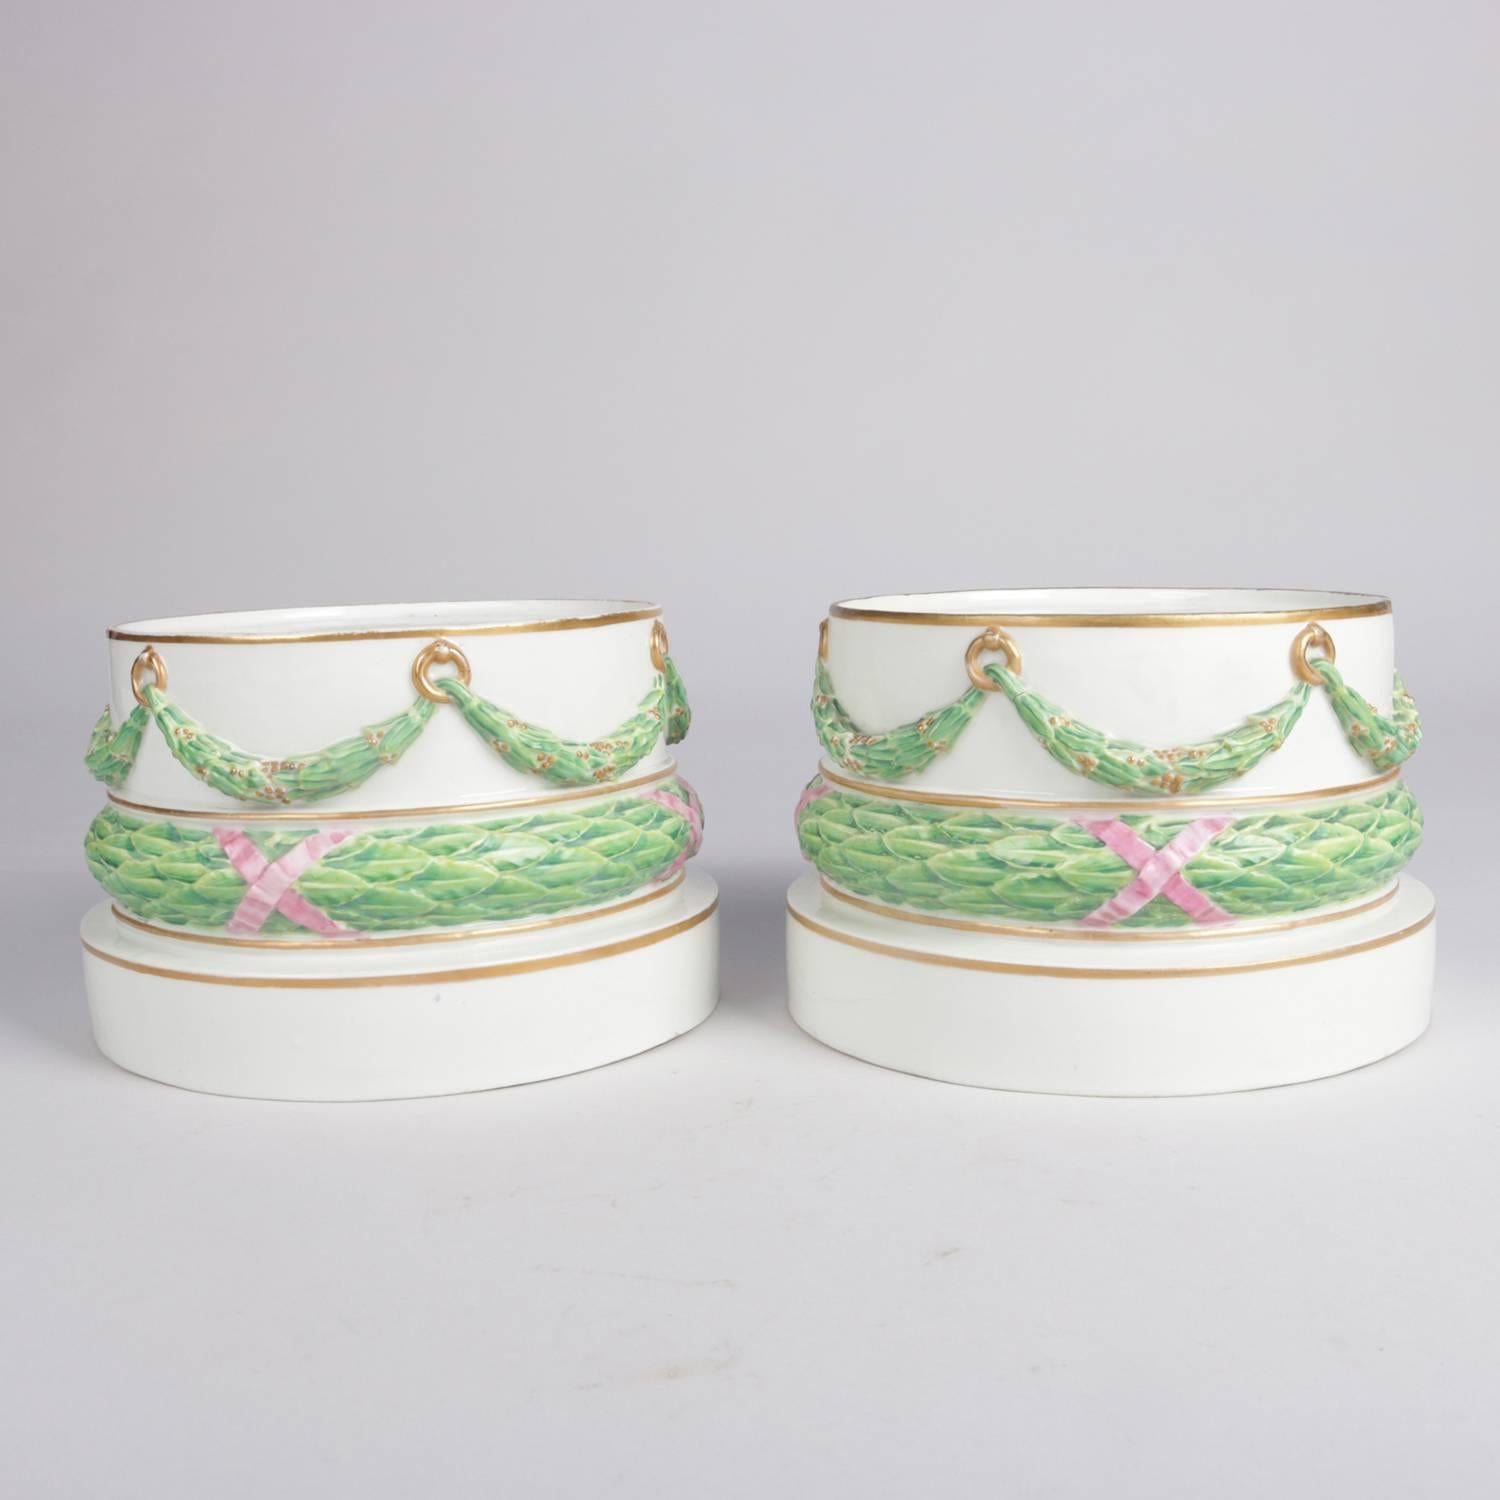 19th Century Pair of Meissen Hand-Painted and Gilt Draped Garland Porcelain Sculpture Plinths